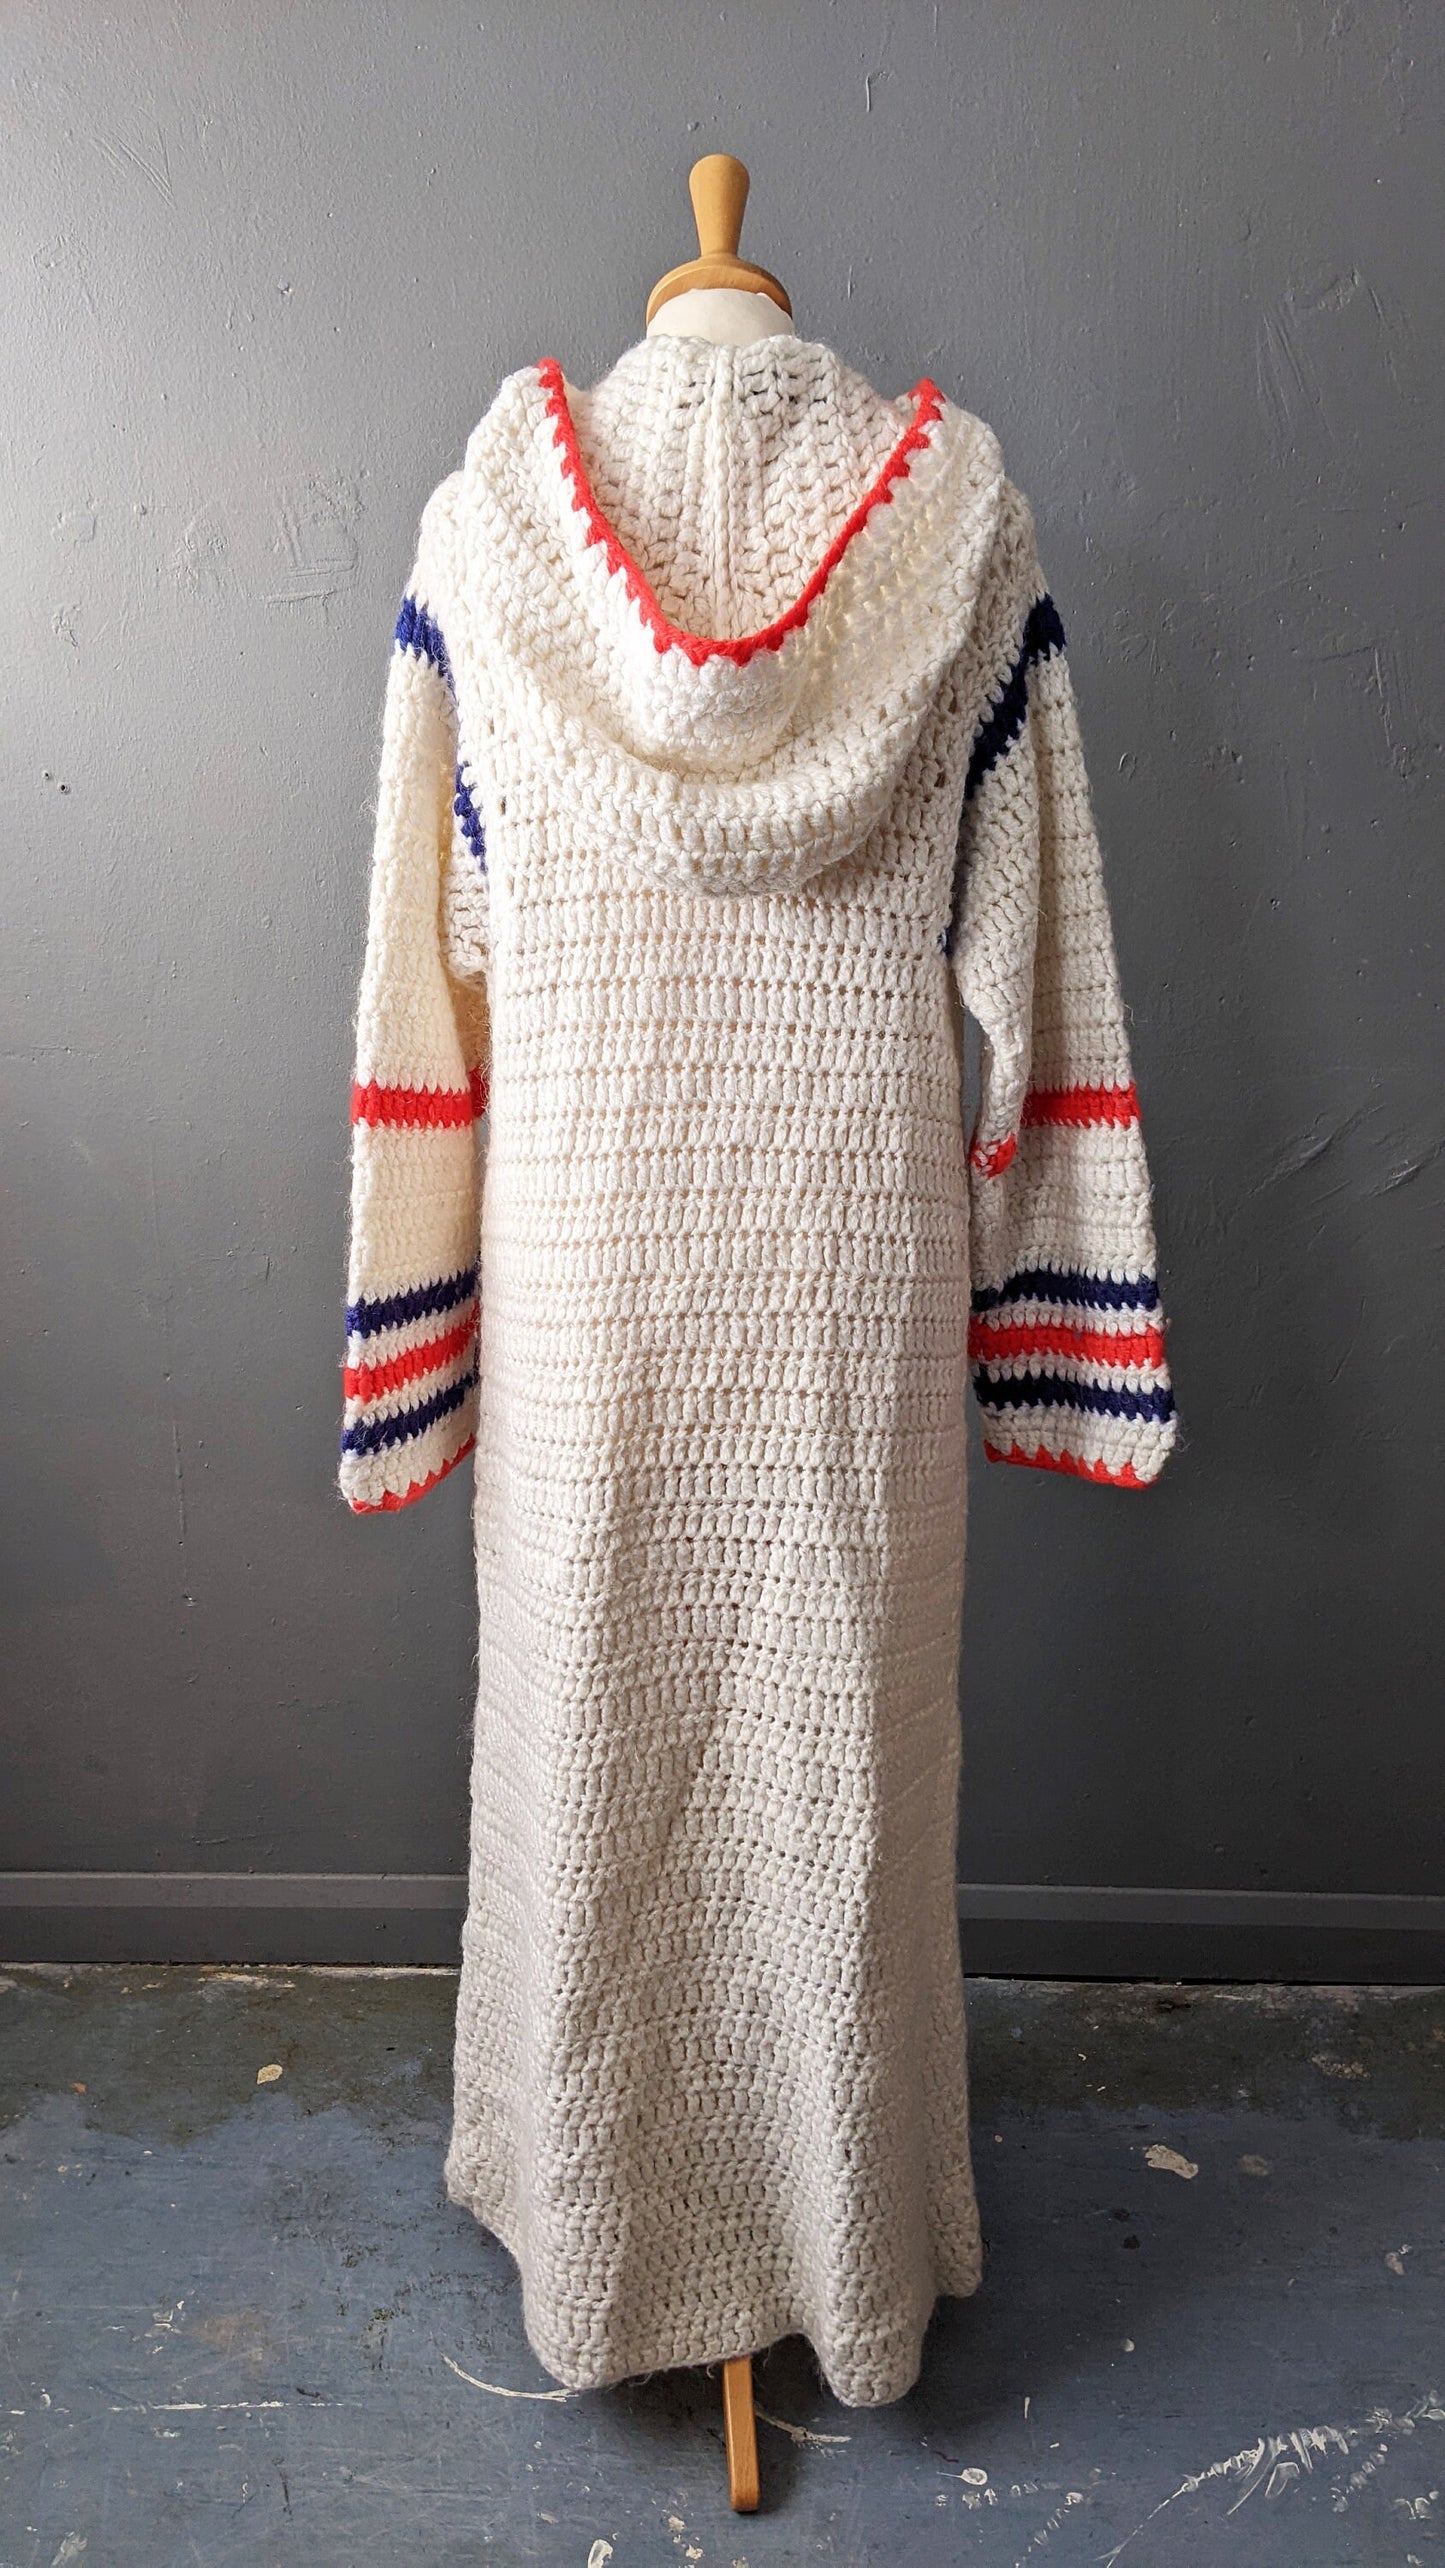 70s Chunky Knit Duster Cardigan, Ankle Length Wool Knitwear, Size Small Medium